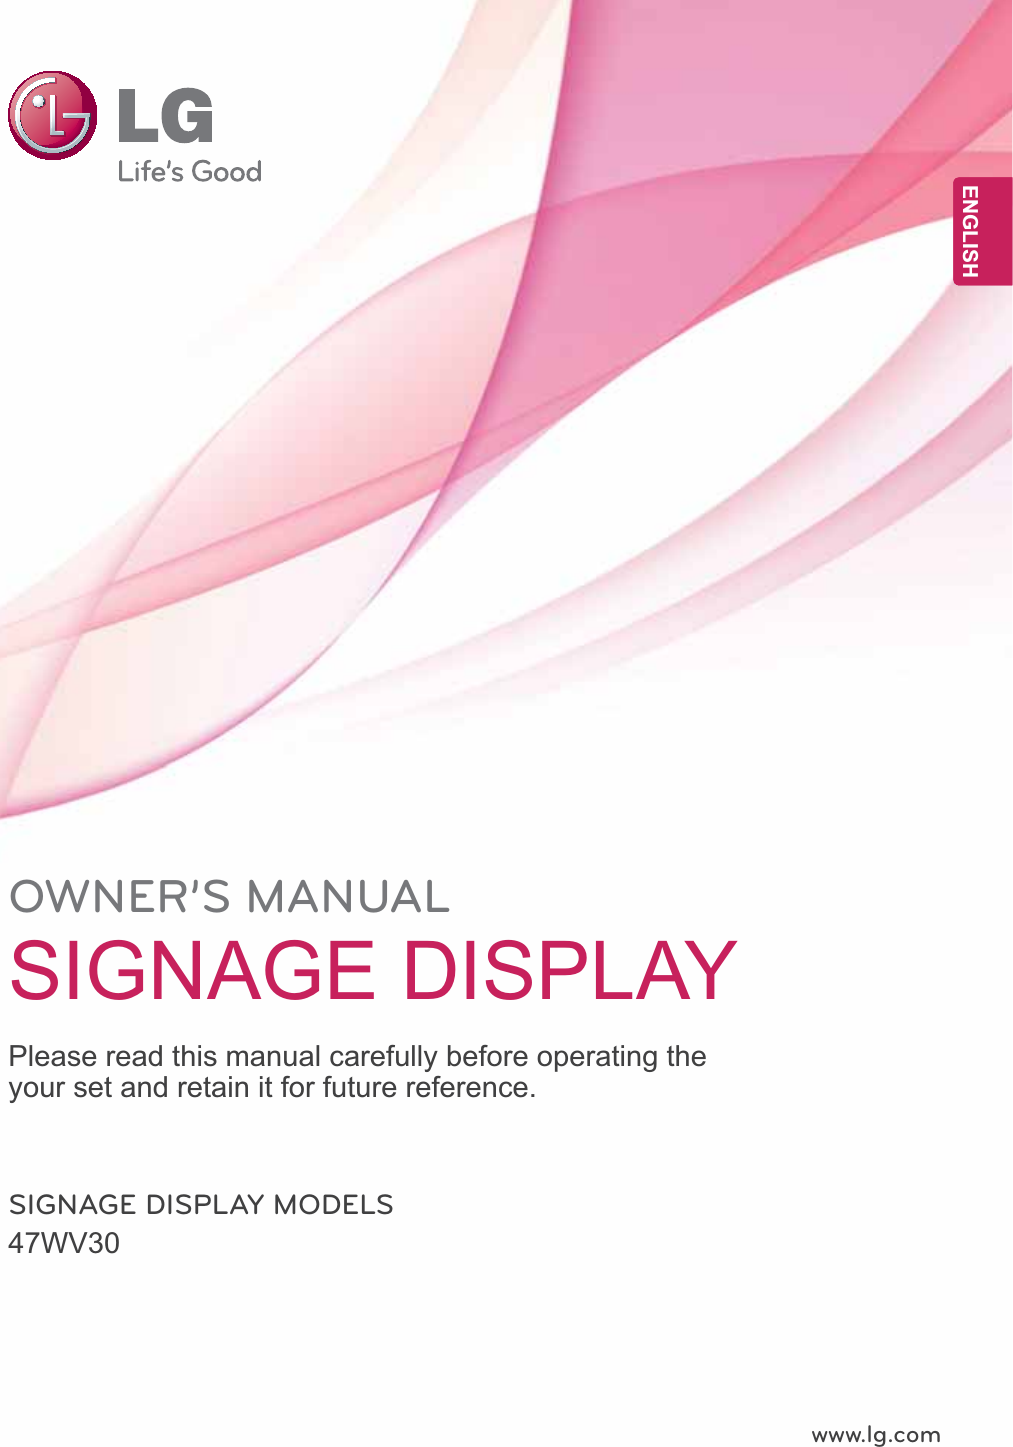 www.lg.comOWNER’S MANUALSIGNAGE DISPLAY 47WV30Please read this manual carefully before operating the your set and retain it for future reference.SIGNAGE DISPLAY MODELSENGENGLISH